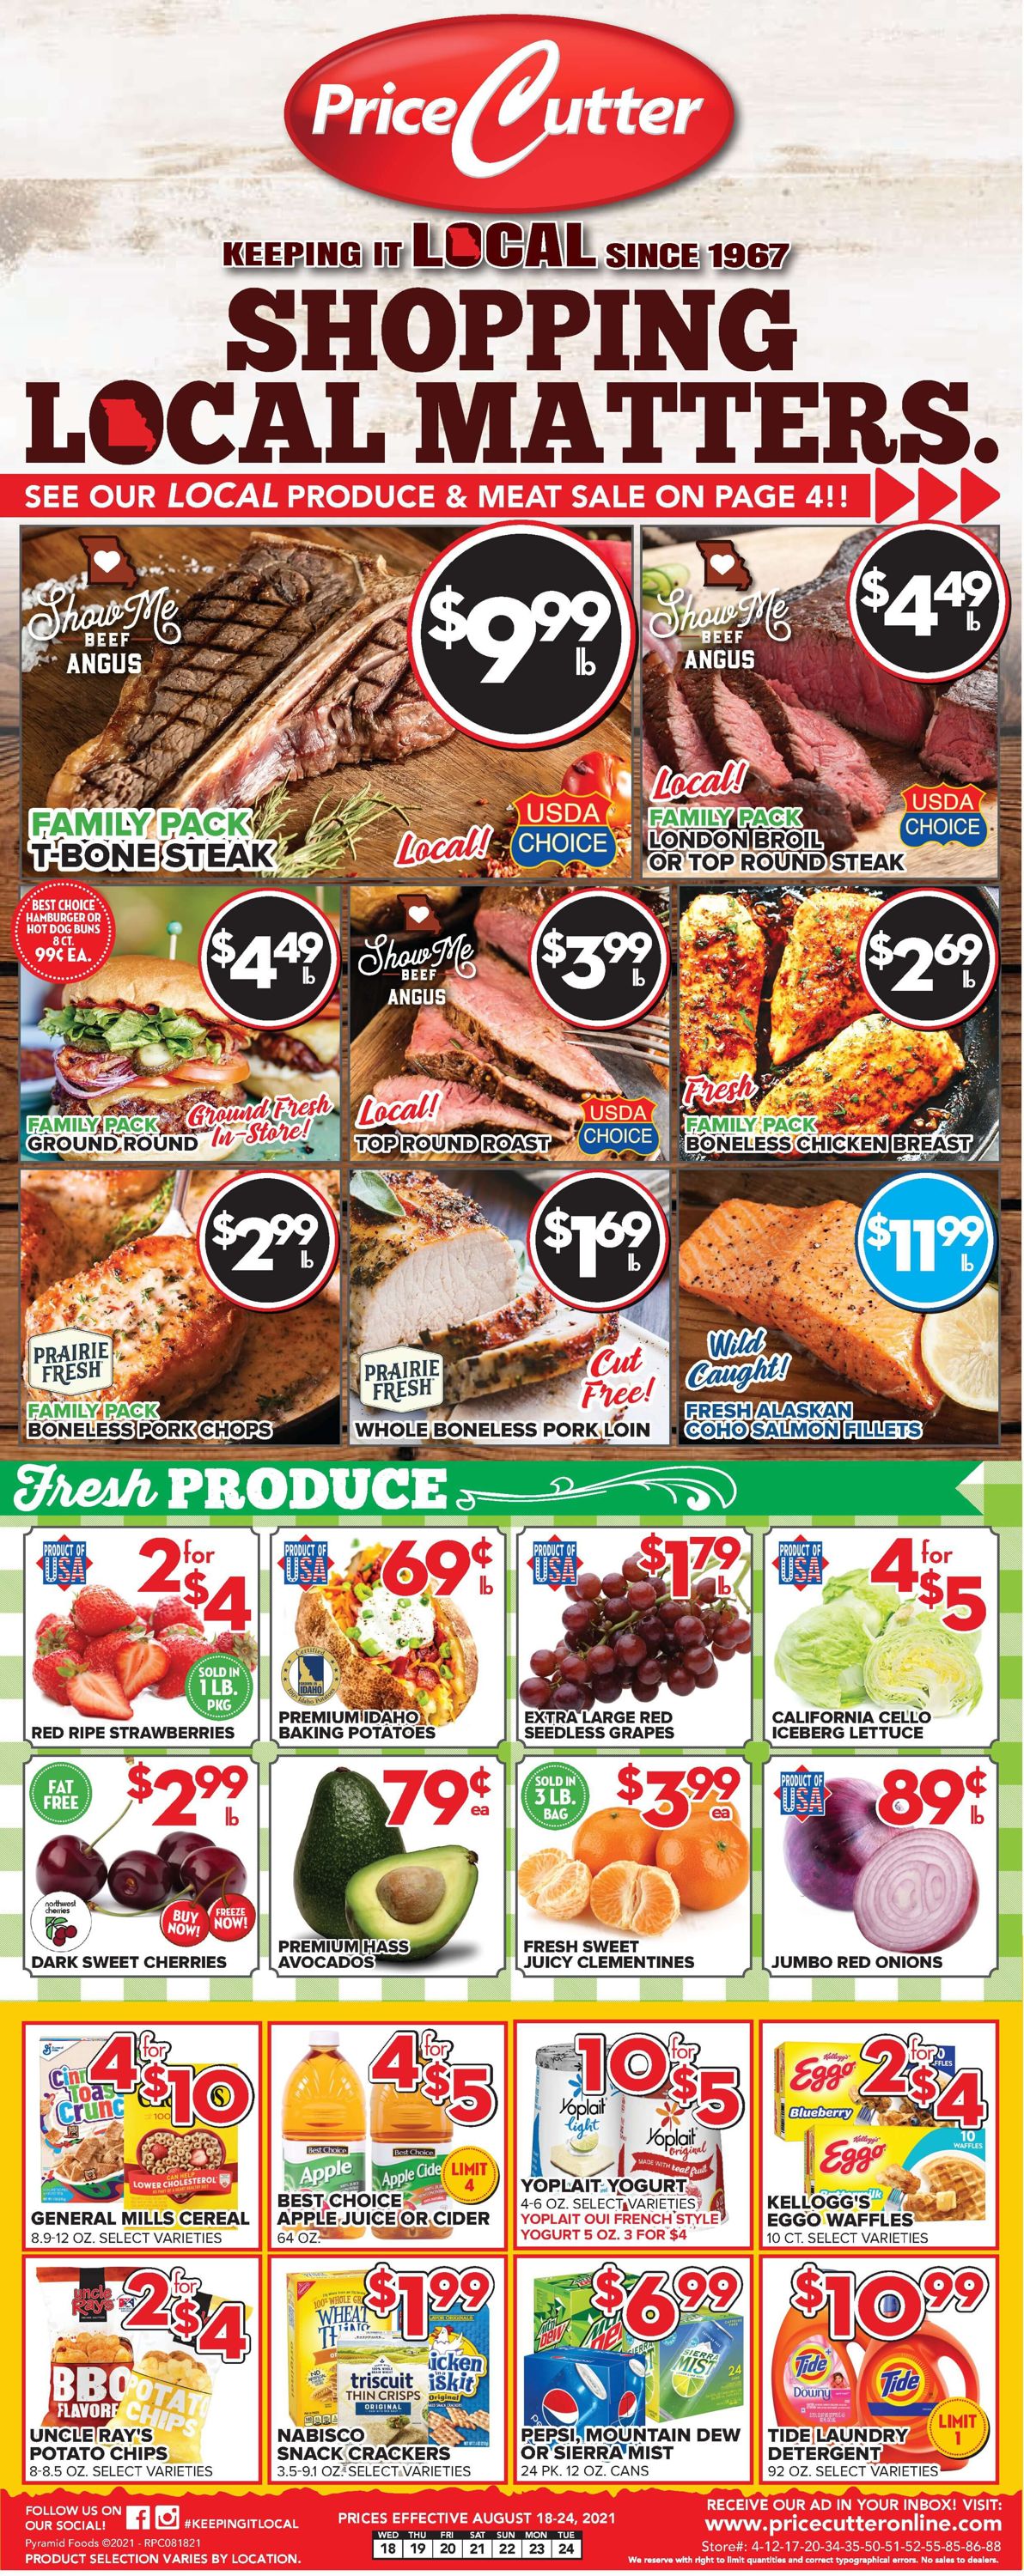 Price Cutter Weekly Ad Circular - valid 08/18-08/24/2021